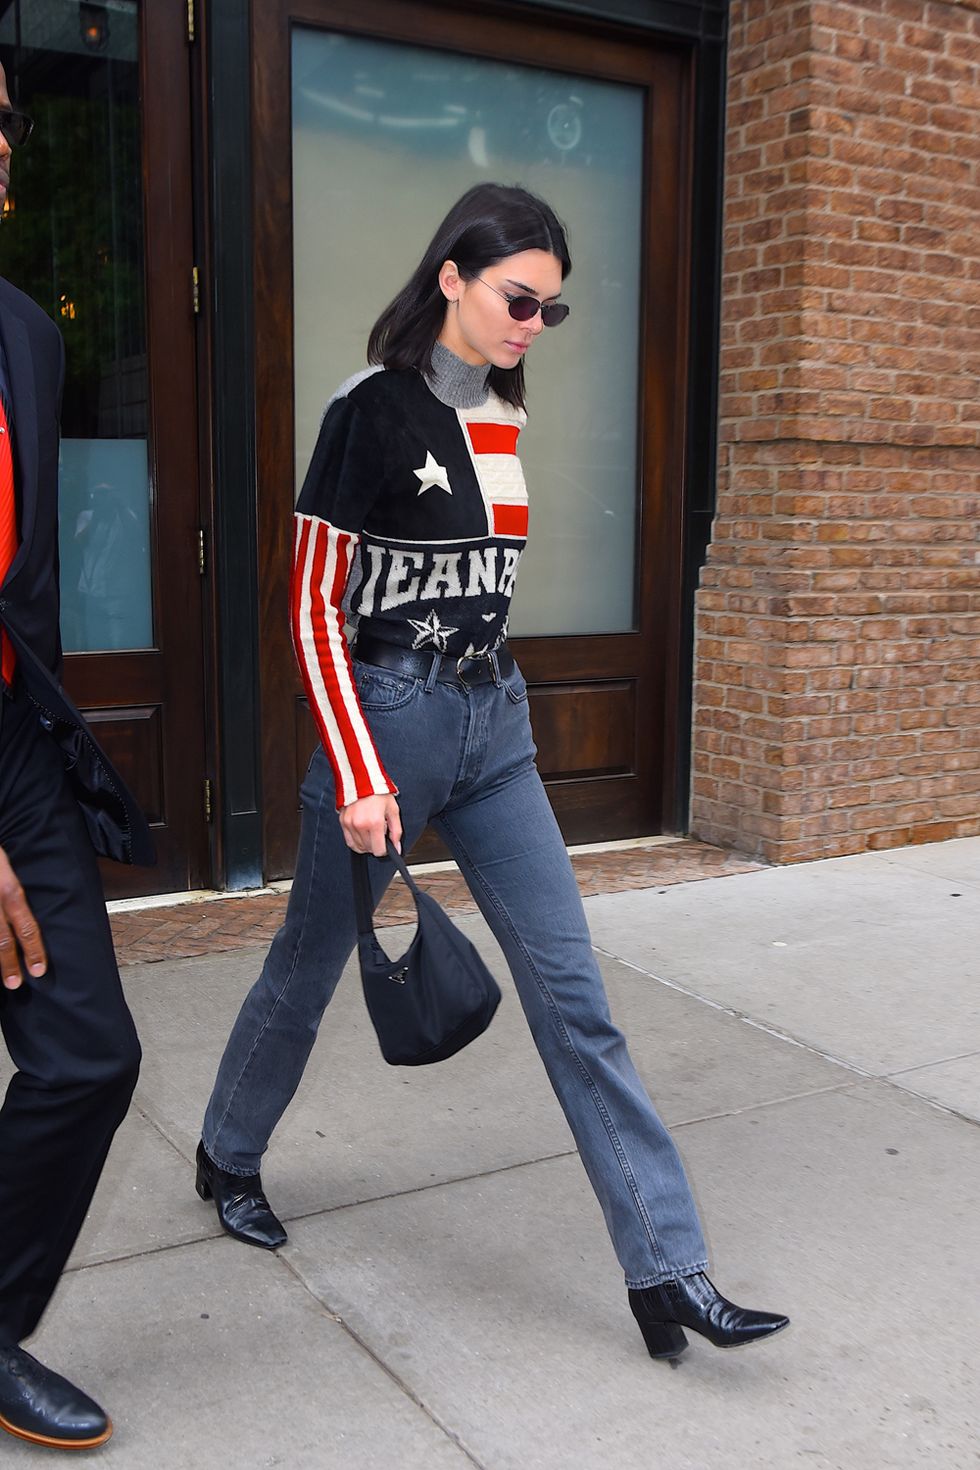 jeans autunno 2018 moda anni 90 kendall jenner